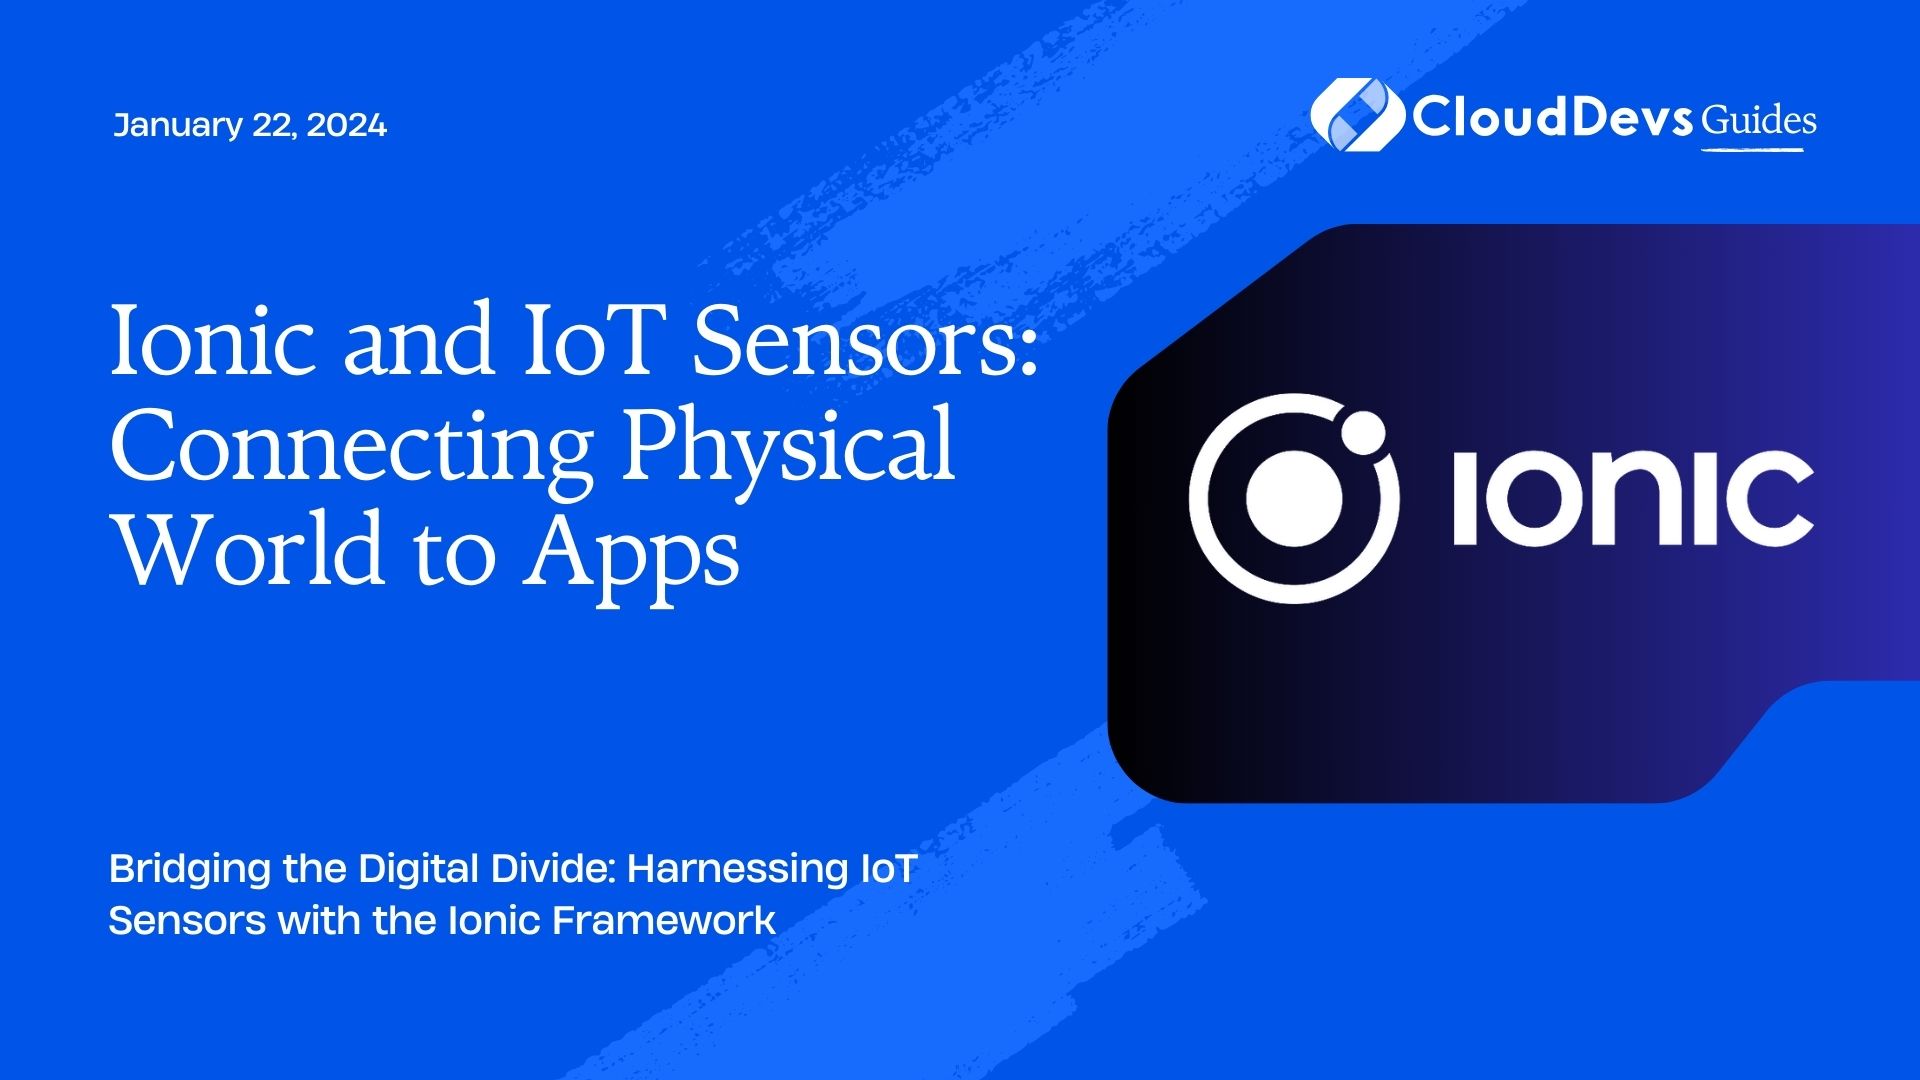 Ionic and IoT Sensors: Connecting Physical World to Apps